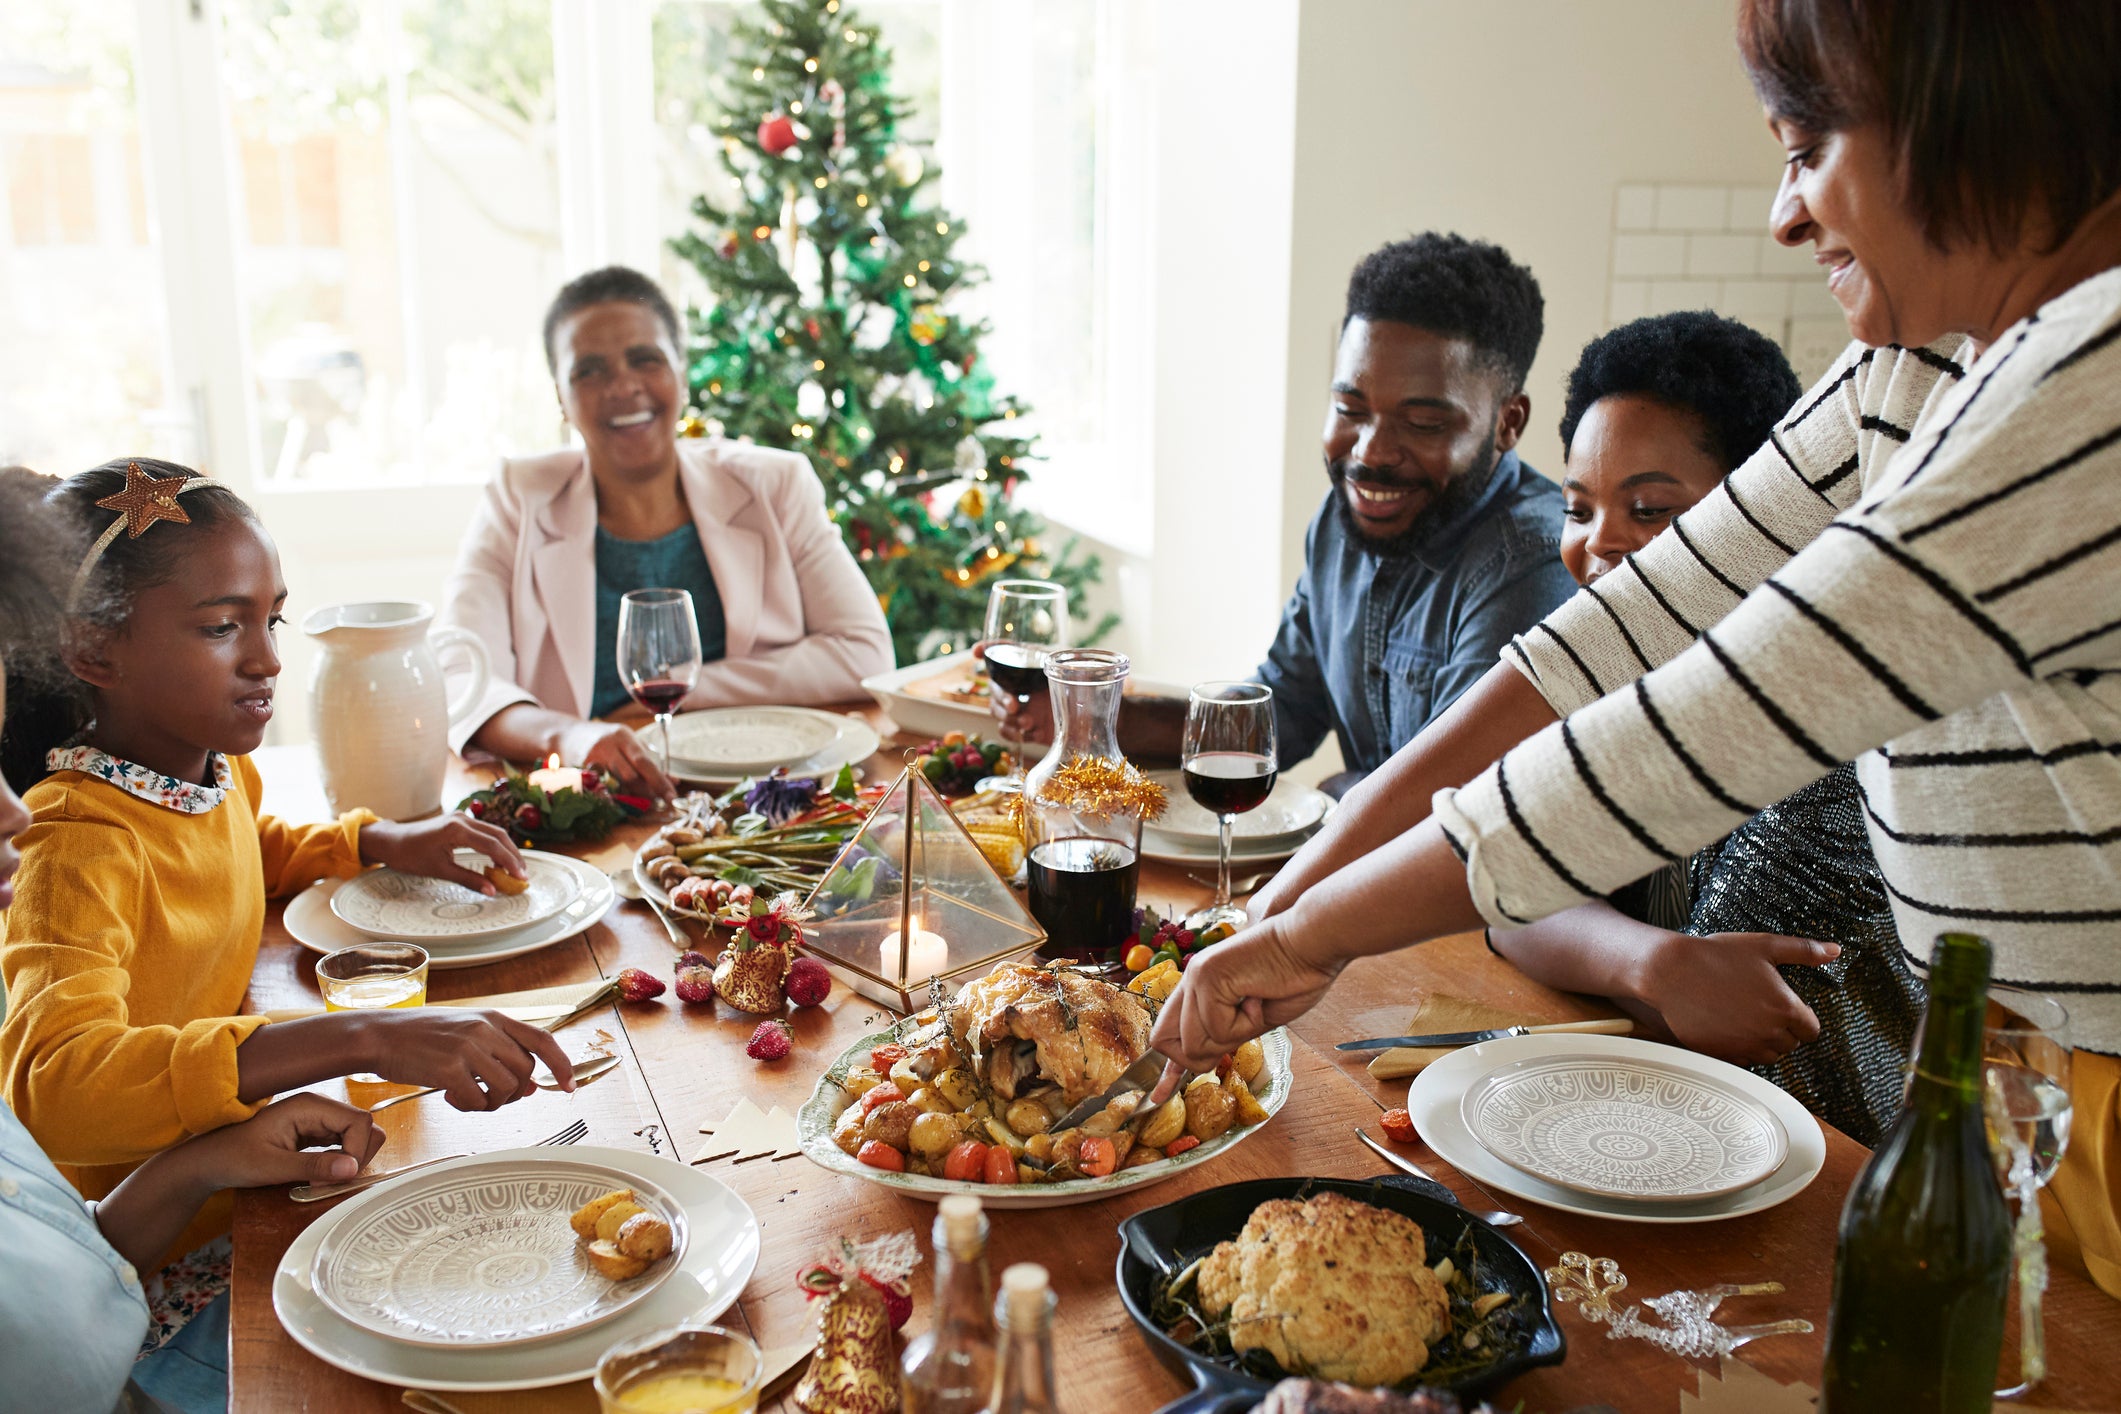 Look How We Ate That! Did You Know We Share These Holiday Dishes Across The Diaspora?